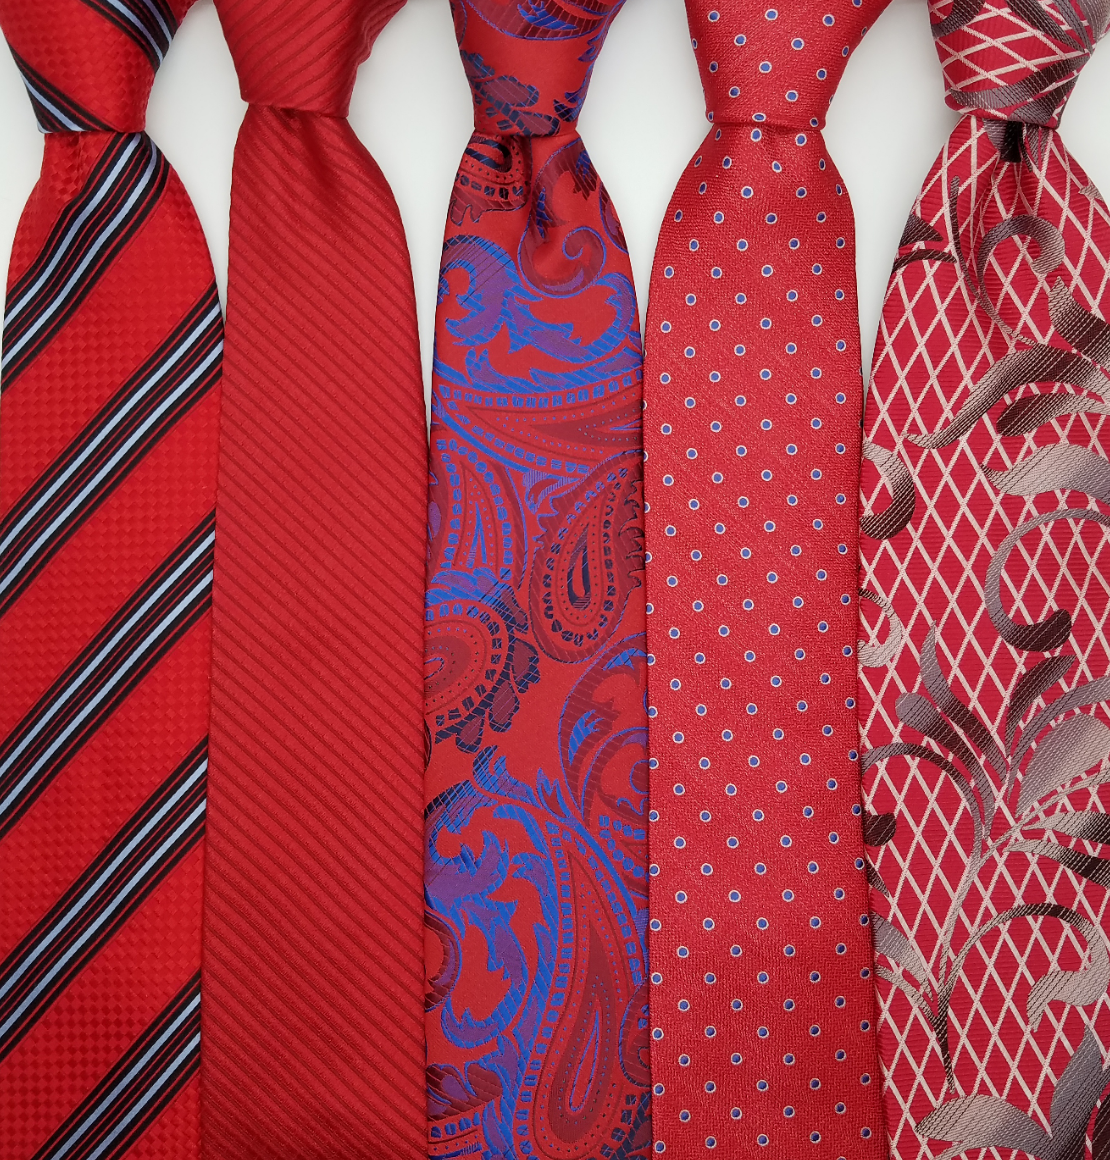 red tie png